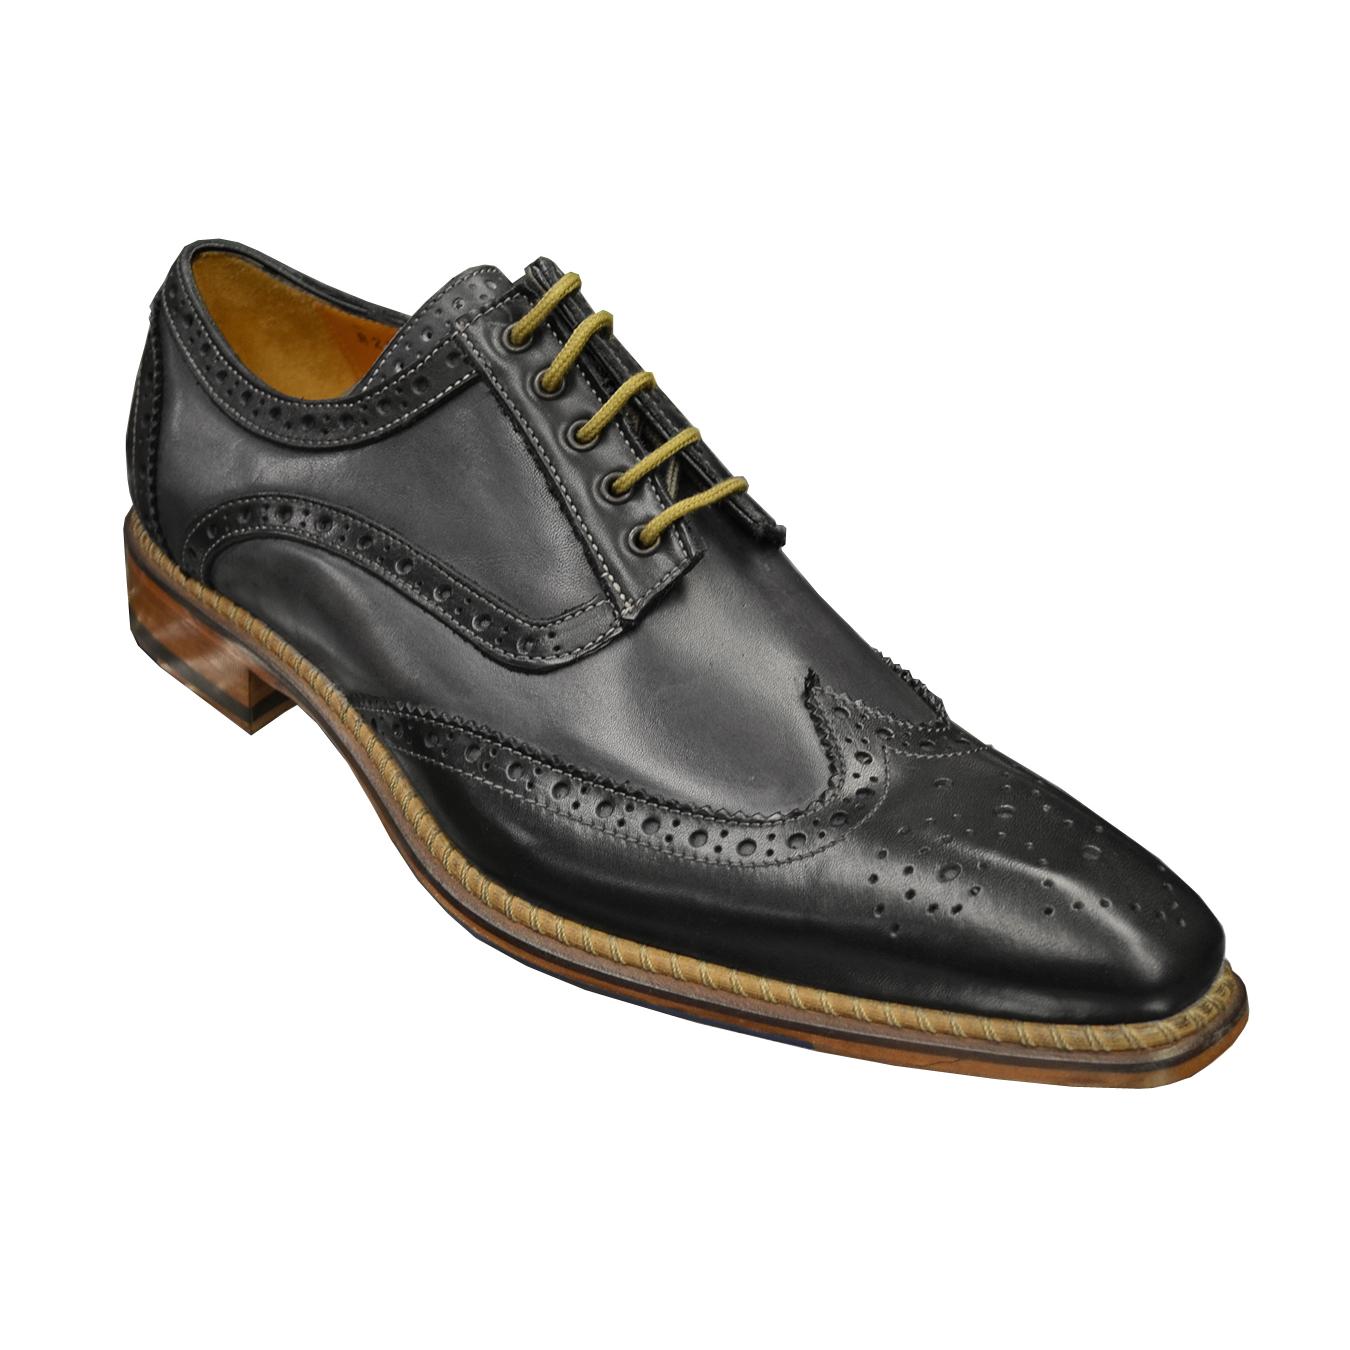 Jose Real Florence Jet Black / Charcoal Grey Italian Wingtip Shoes With ...